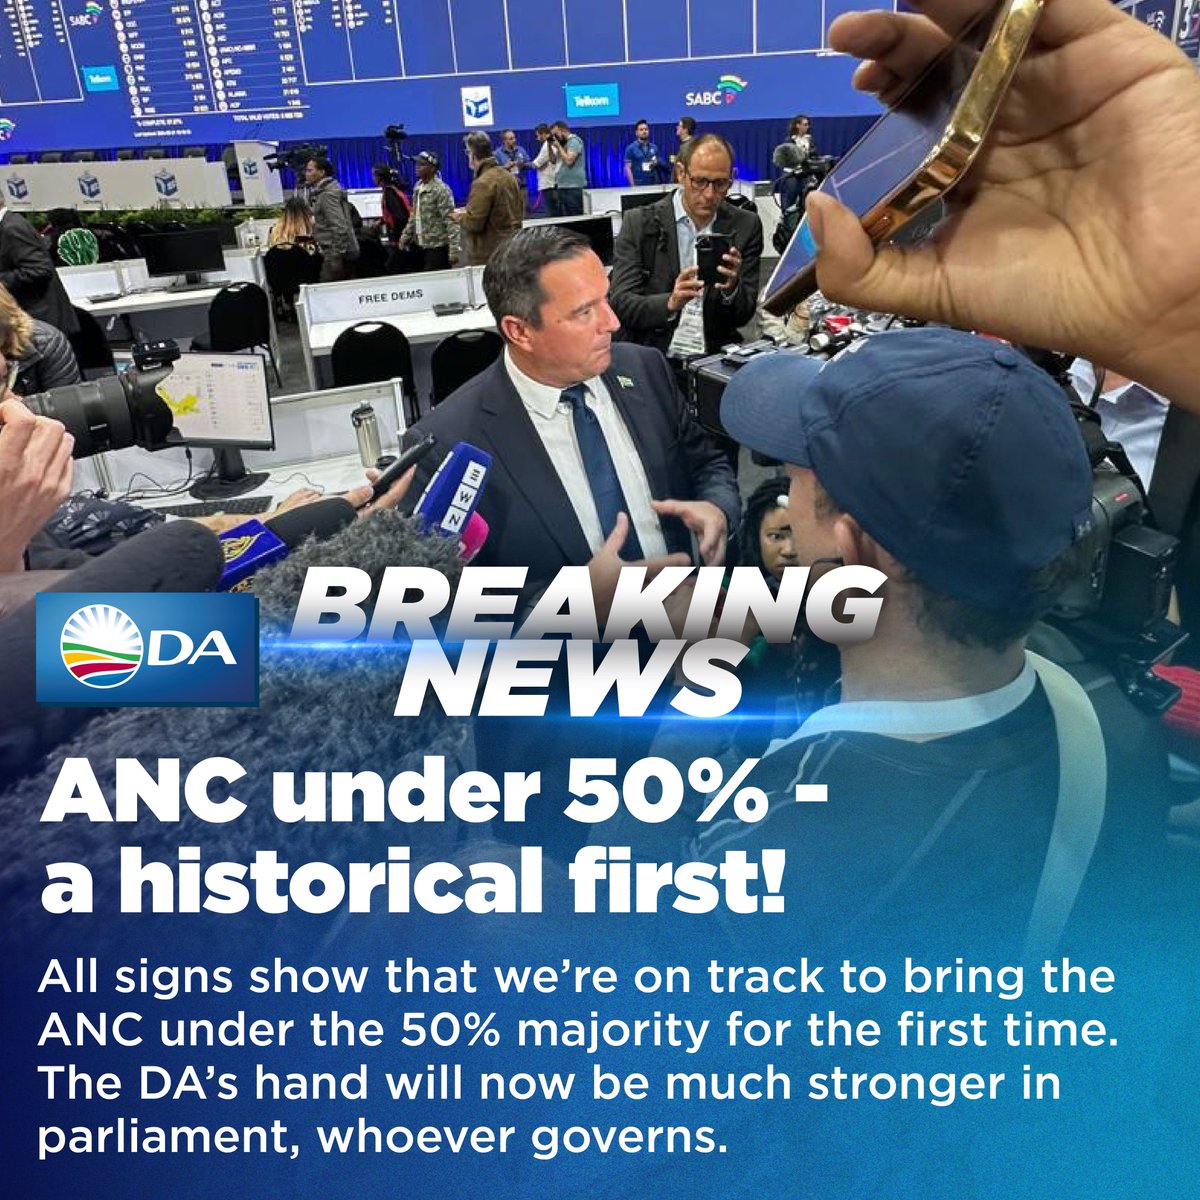 🚨BREAKING: For the first time in 30 years, the ANC will lose its majority. The DA’s mission has been to end the ANC’s dominance and to transform South Africa into a vibrant, multiparty democracy where politics is a battle of ideas for the people.

We are on track to #RescueSA.🇿🇦